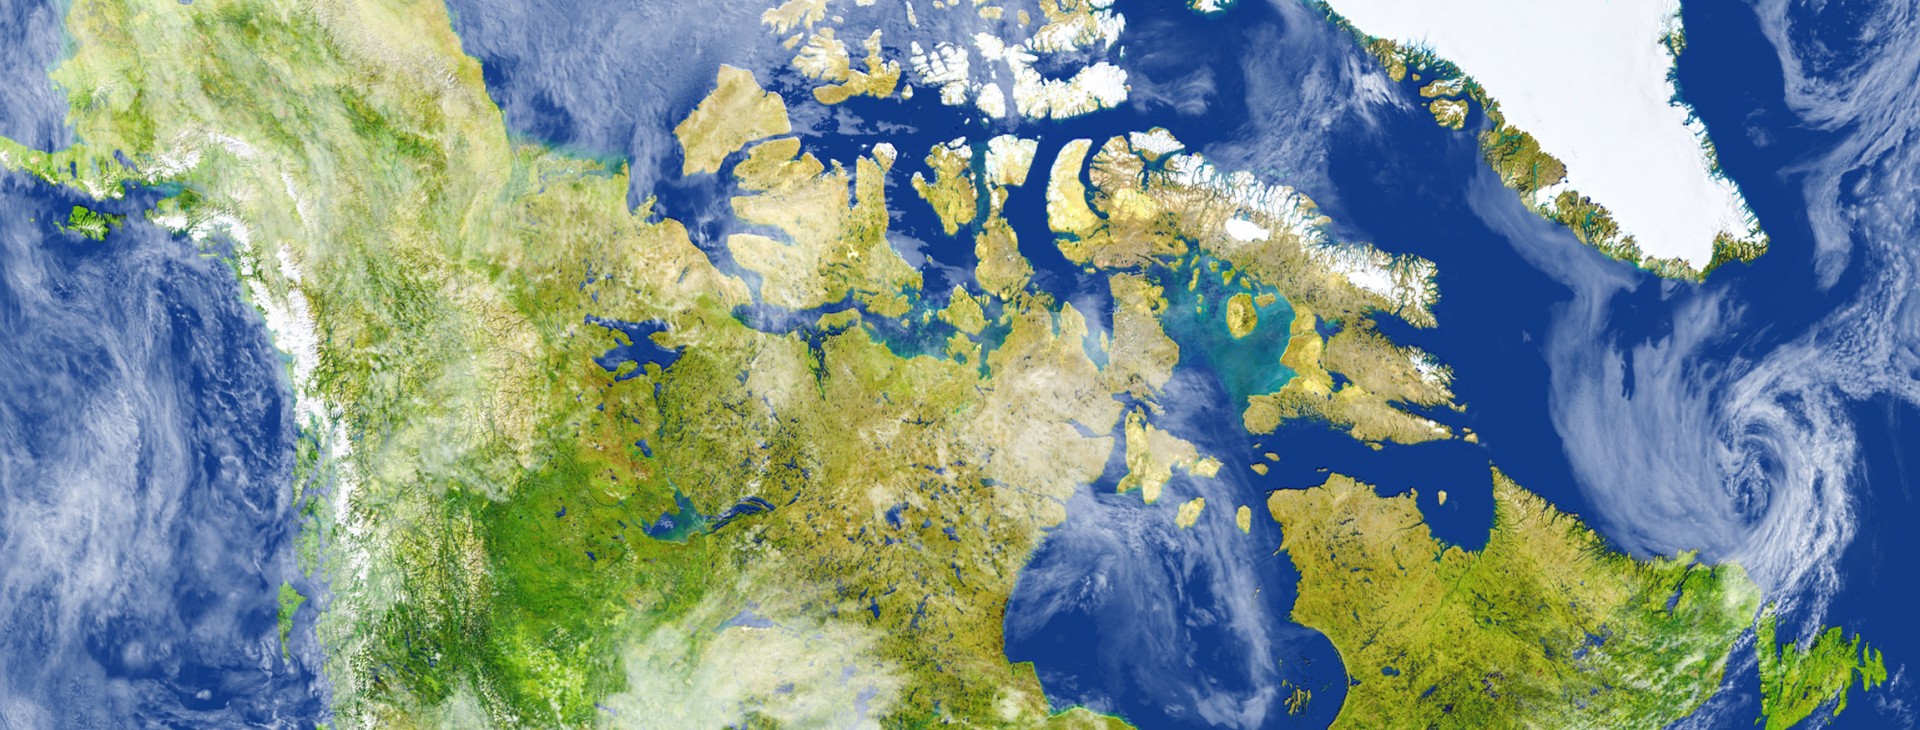 Satellite image of northern Canada